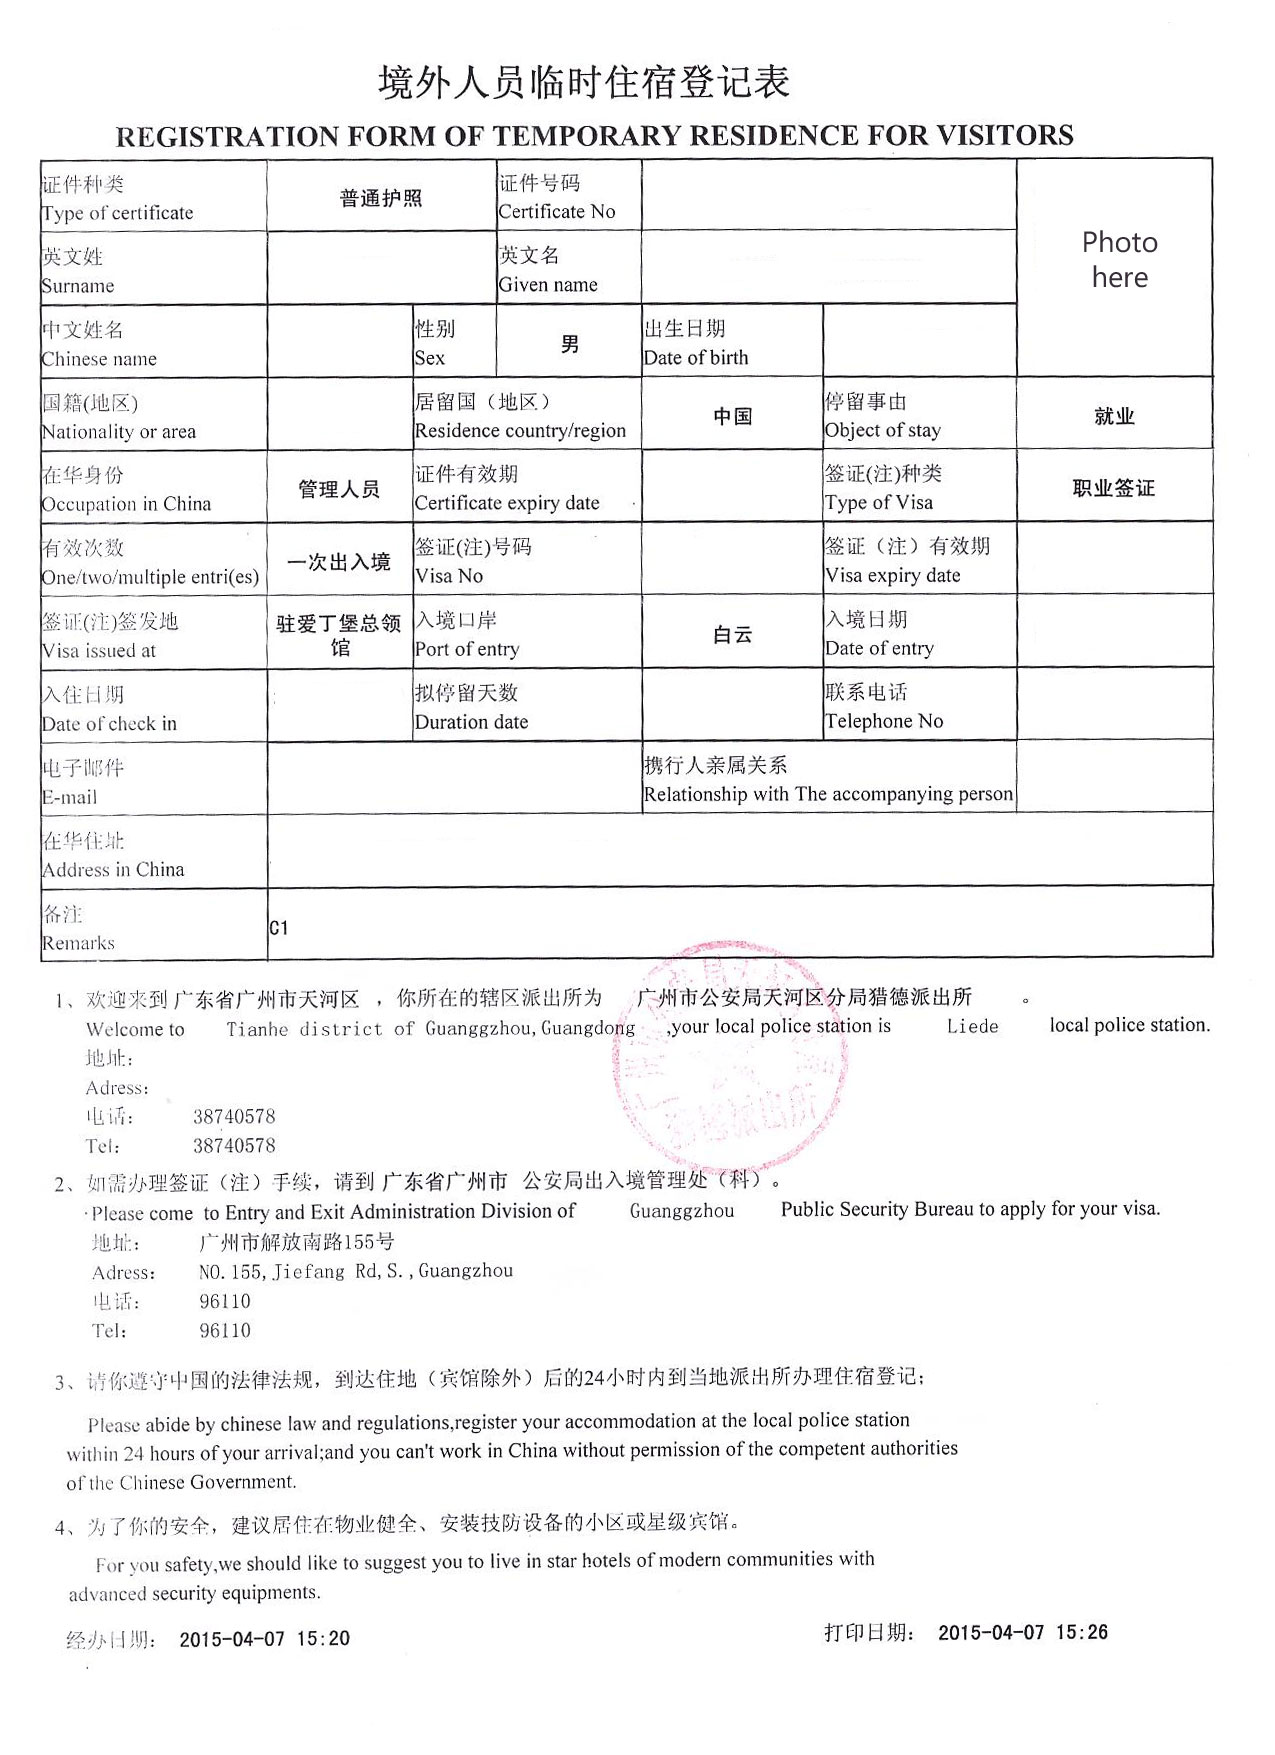 Temporary residence document for foreigners in China